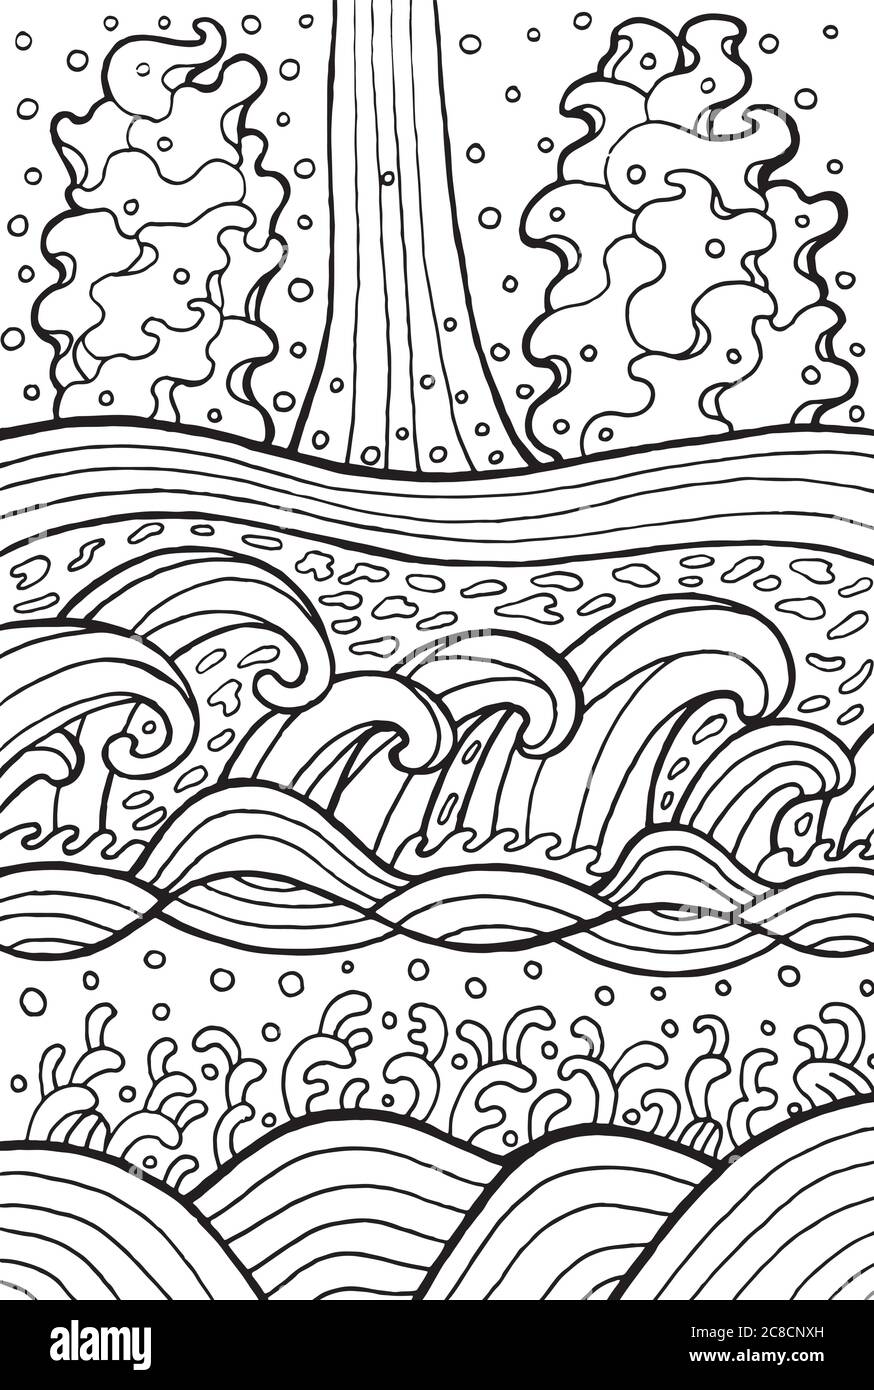 Sea and river waves doodle artwork for coloring pages vector i stock vector image art